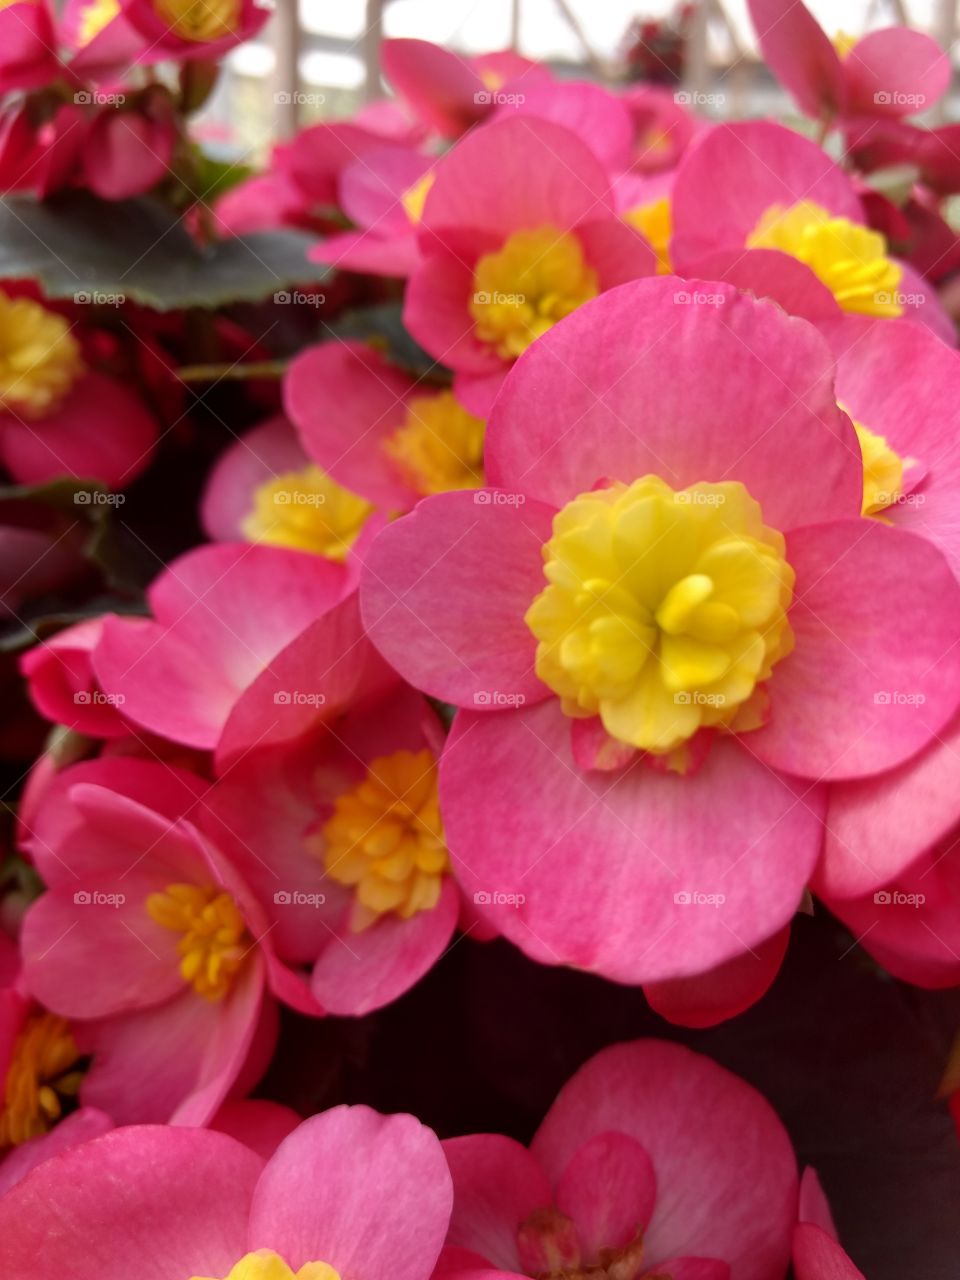 incredibly bright yellow and pink flower surrounded by smaller ones